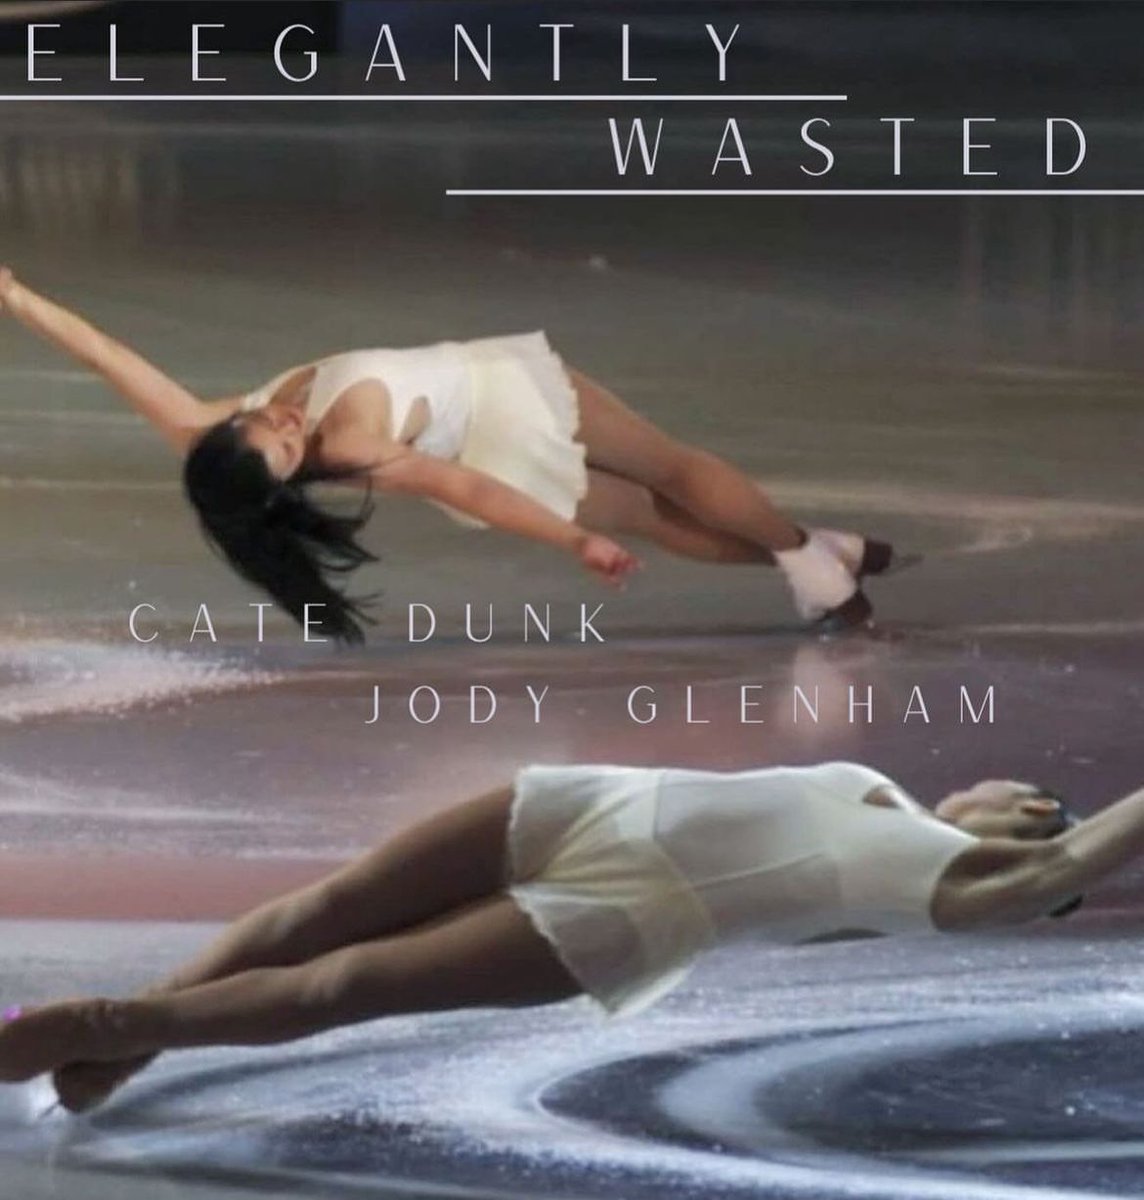 Up in The Projection Room tonight get Elegantly Wasted with Jody Glenham & Cate Dunk! 10:30pm-2am Tickets at the door (online tix sold out)